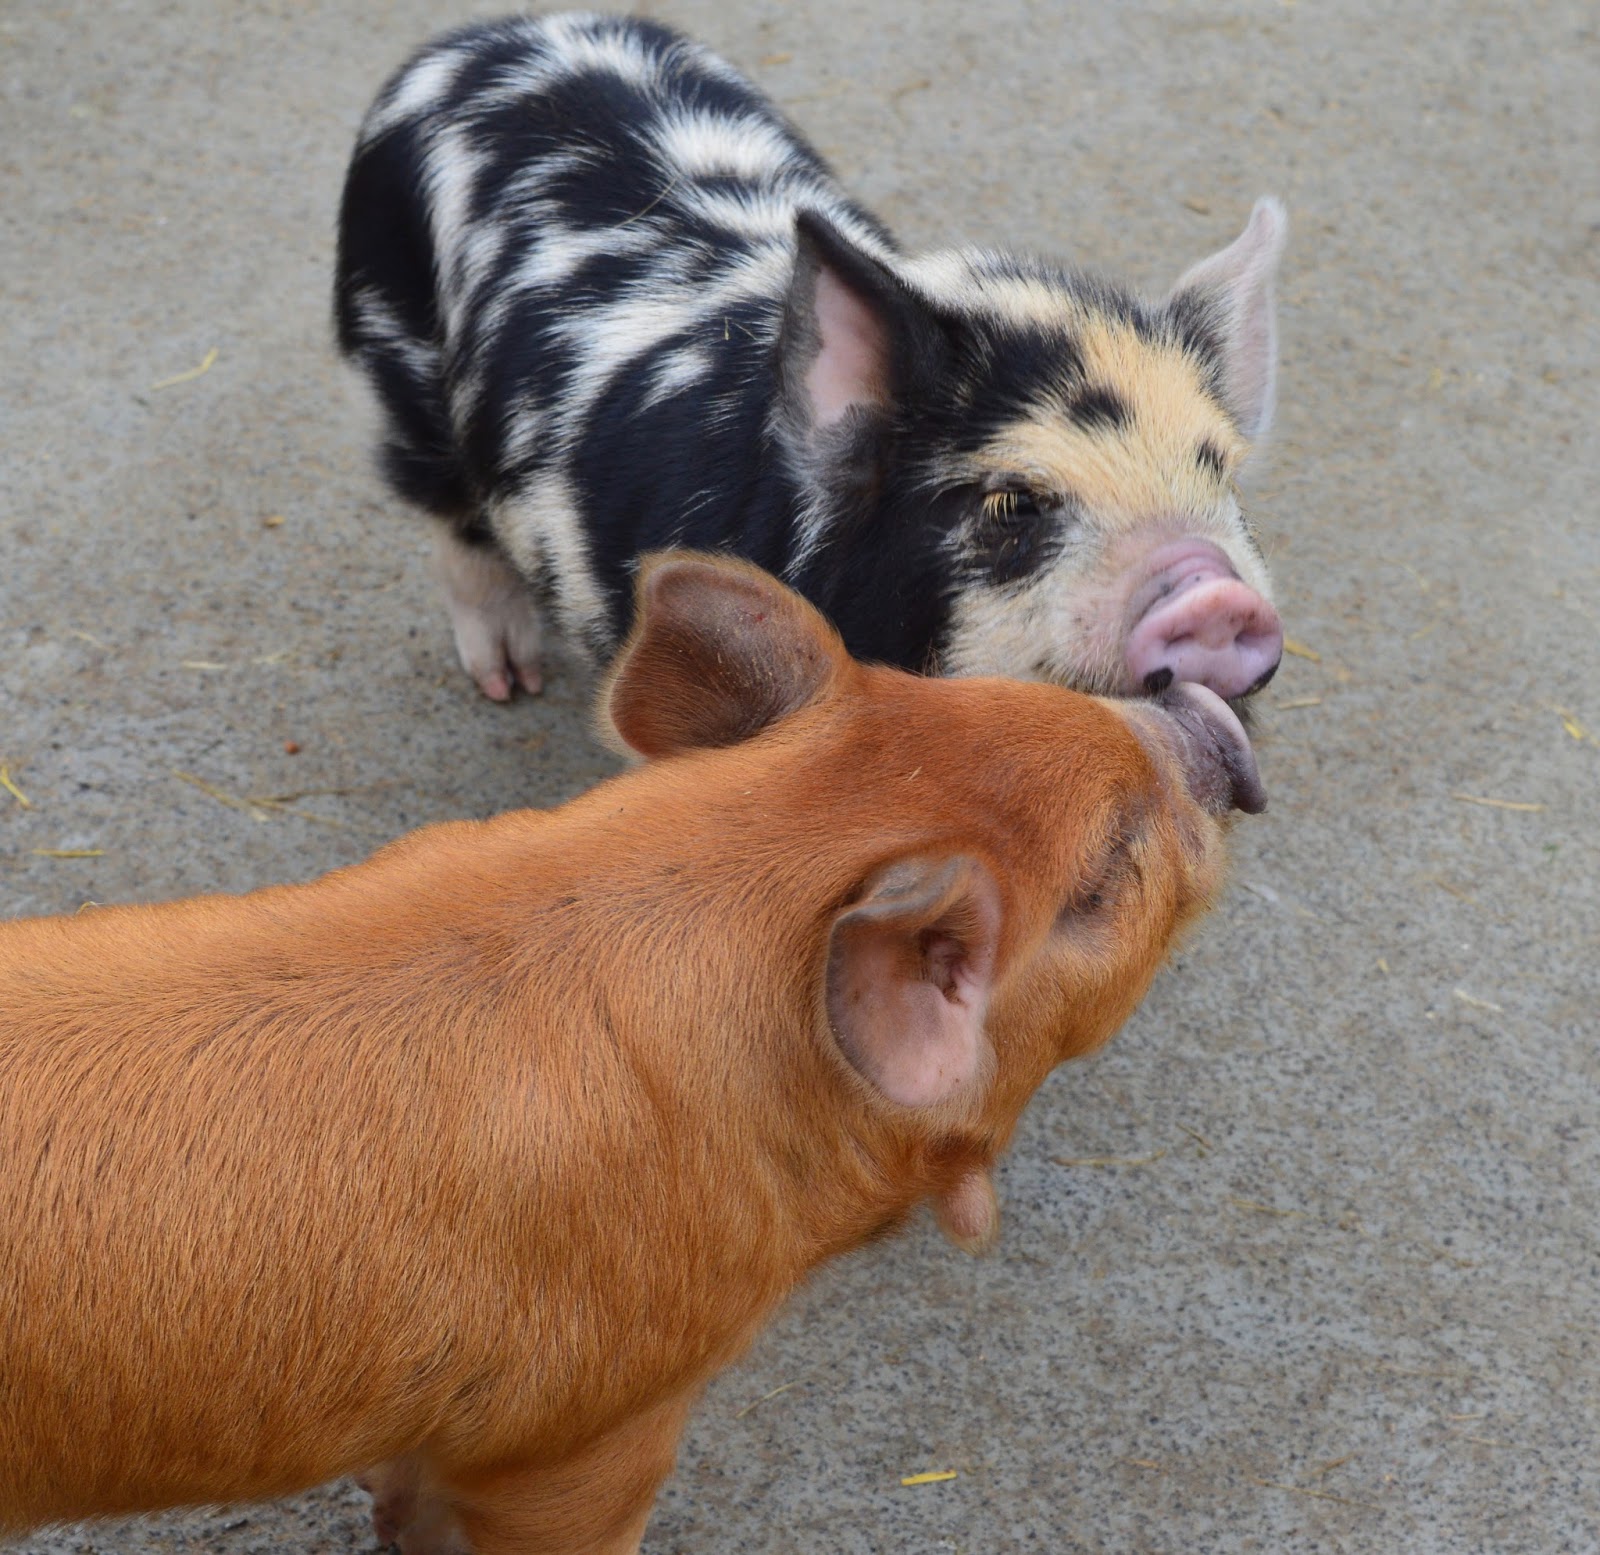 Overnight Stay at South Causey Inn | County Durham - Animals Pigs